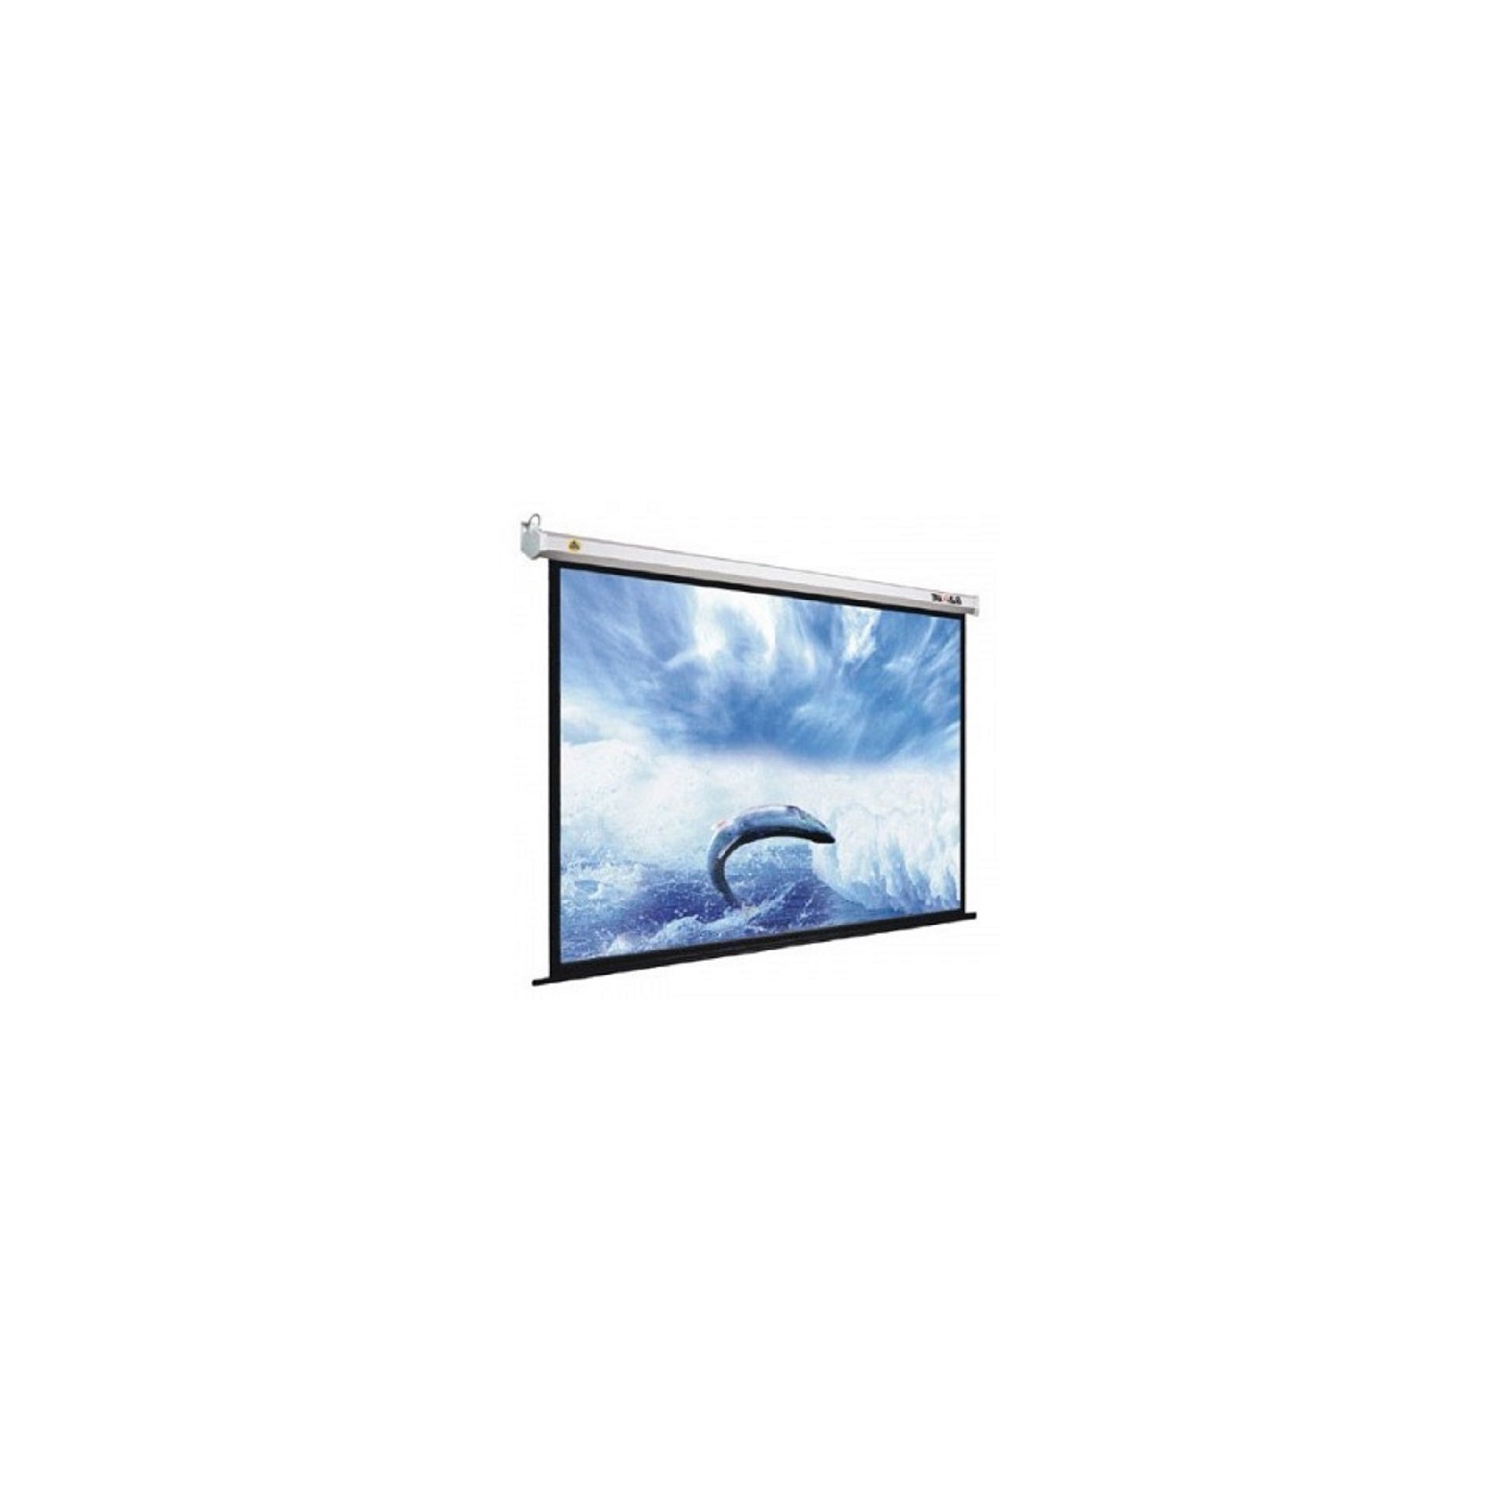 eGALAXY ® 120" 16:9 Electric/Motorized Projector Screen (Matte White) PSE120A